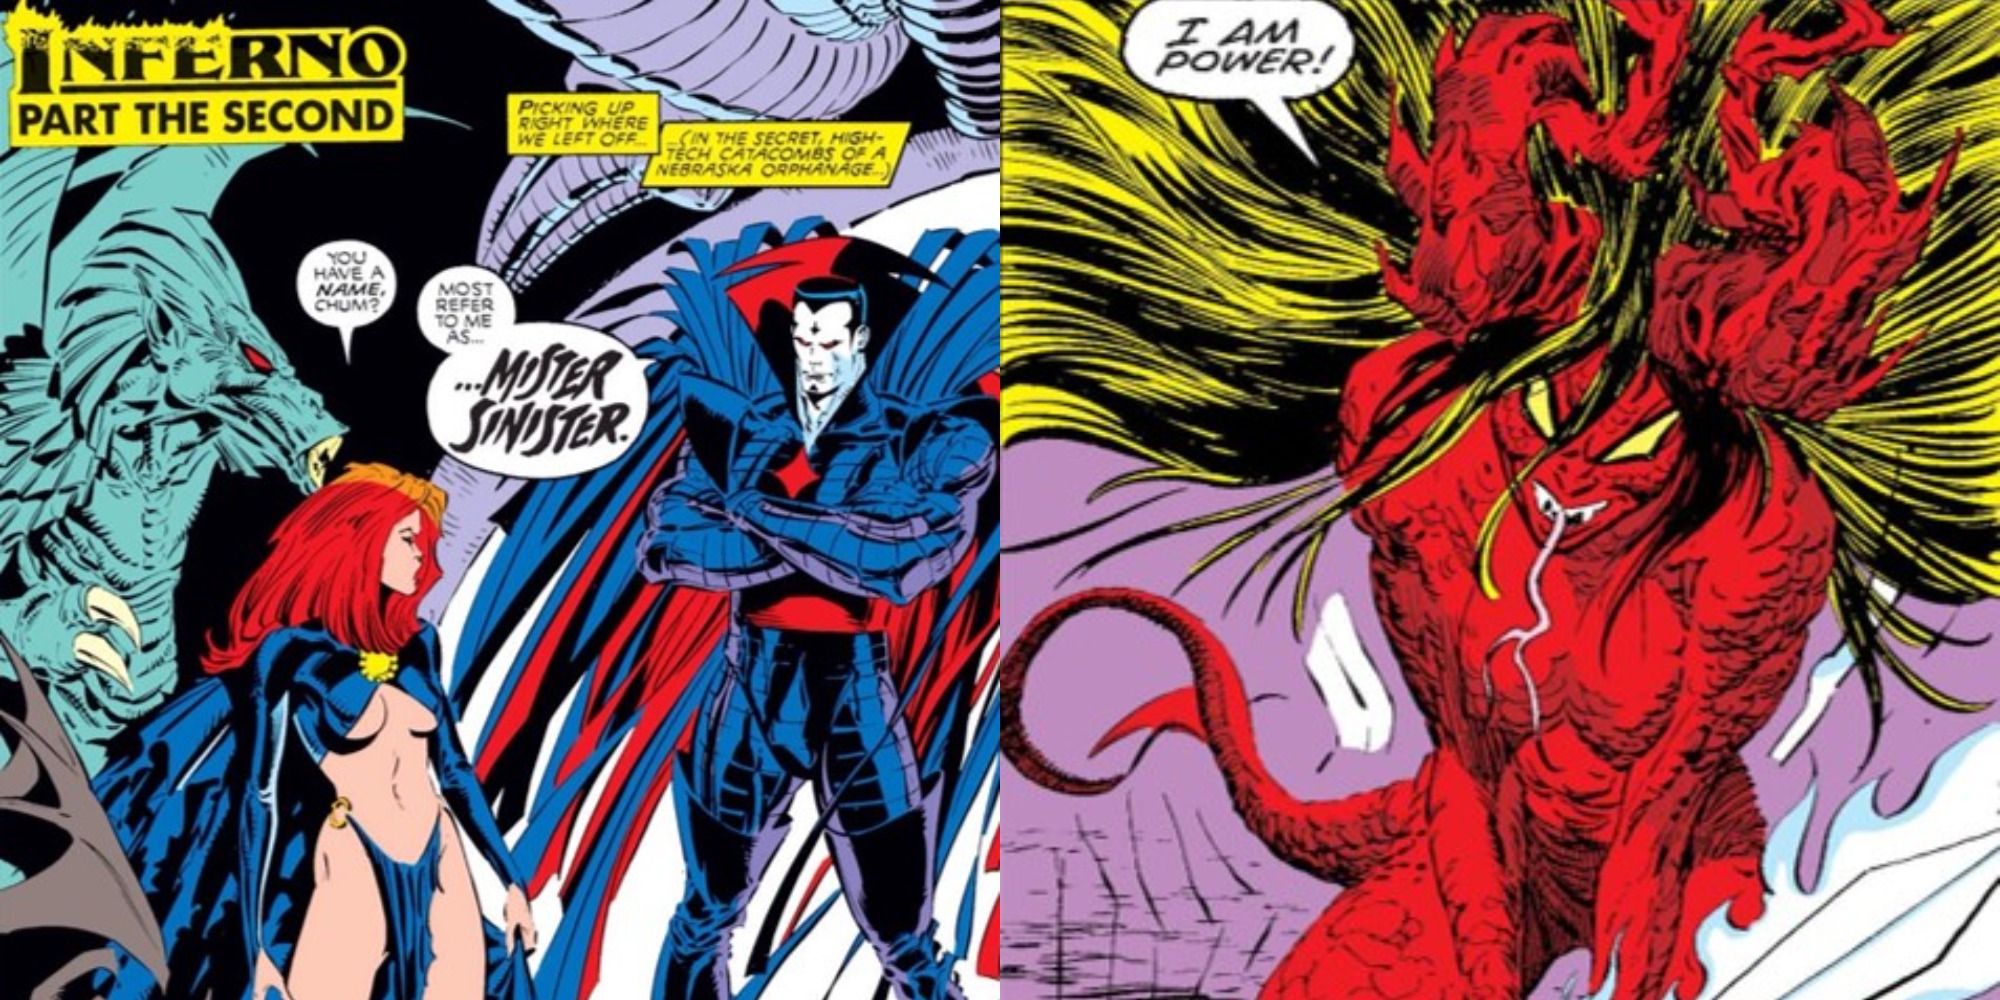 Split image showing the Goblin Queen with Mister Sinister, and the Darkchilde in Marvel Comics